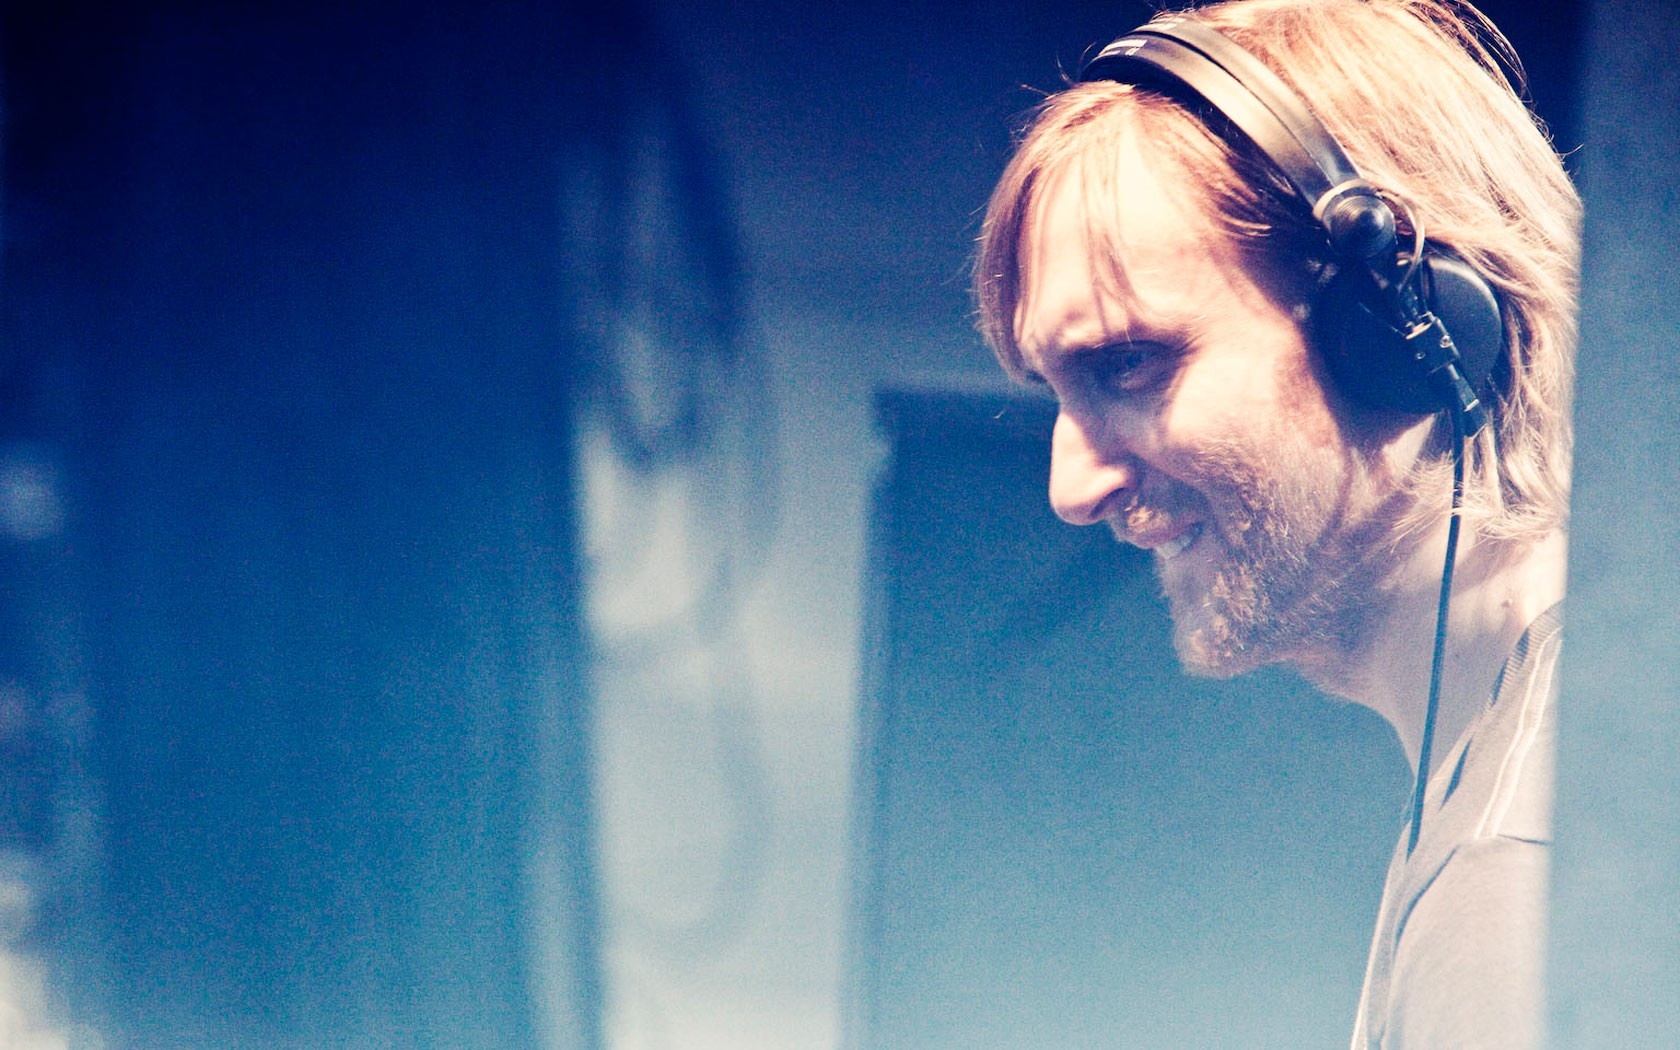 Today's stories include David Guetta's message to his critics, Above & Beyond on American EDM, Amon Tobin's ISAM Live 2.0 Tour, and the SOUNDUO Dub ...